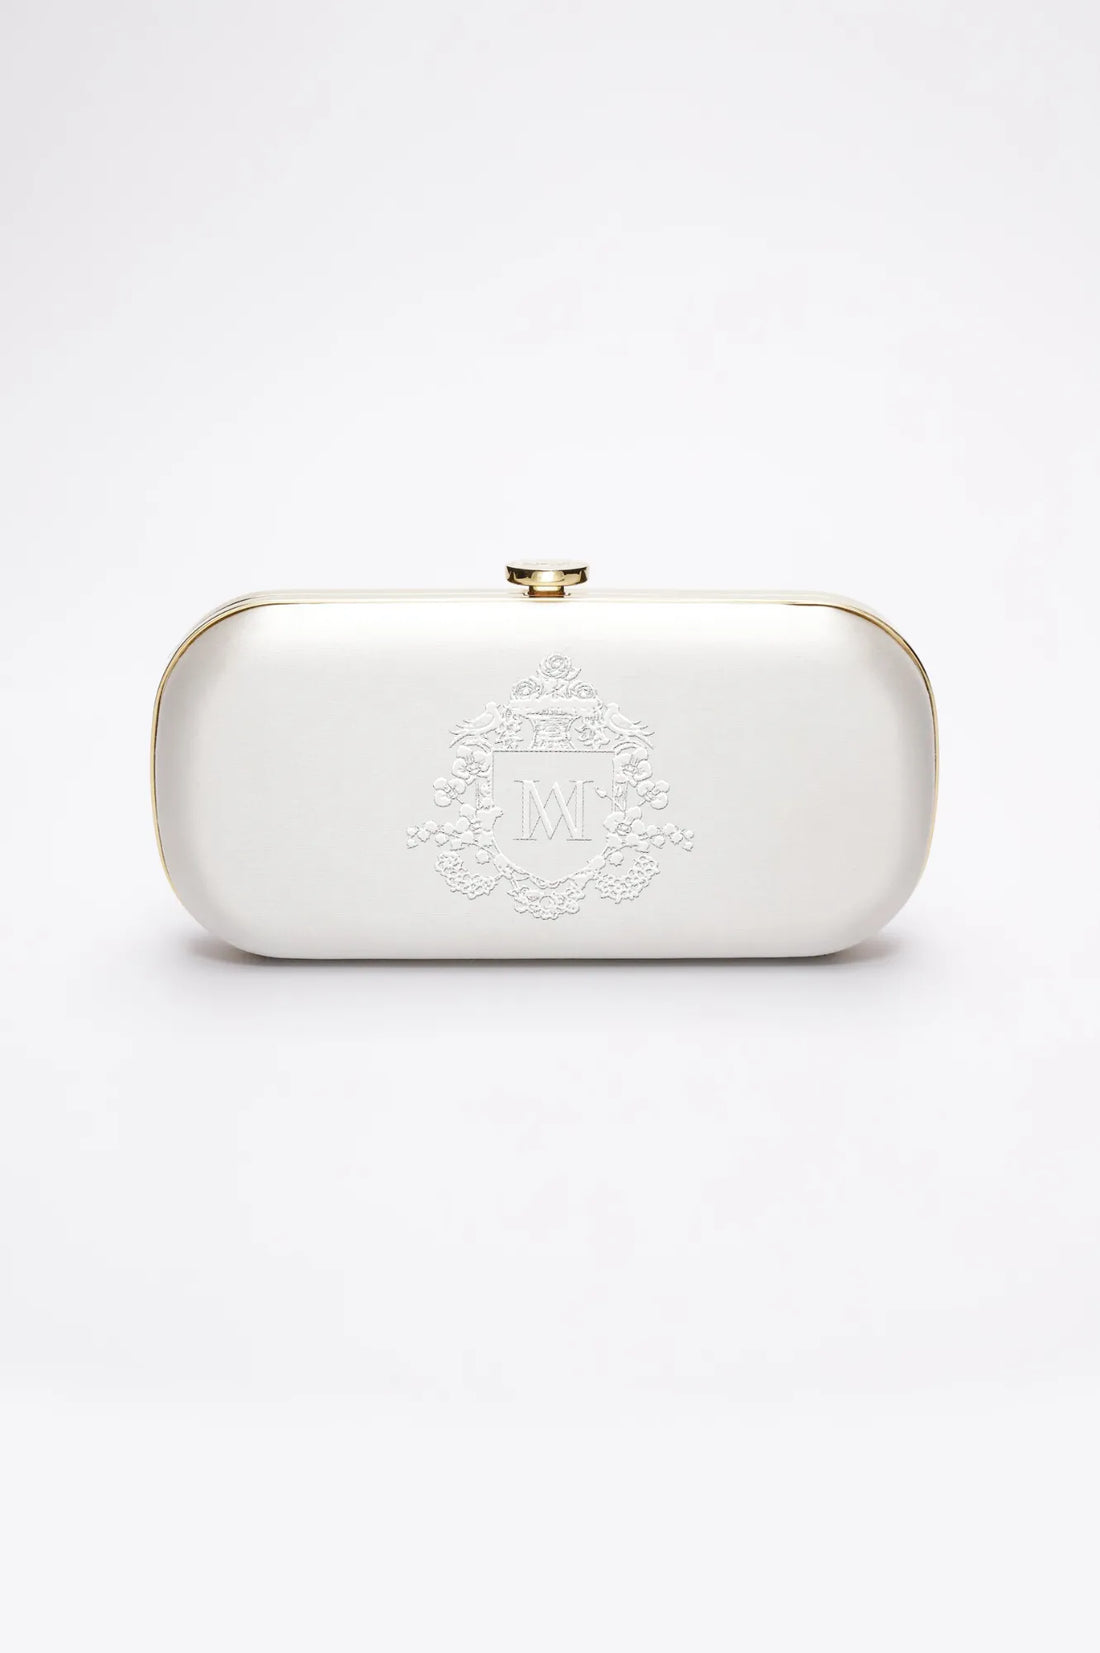 Front view of ivory satin Bella bridal clutch with gold hardware and white bridal monogram embroidery.